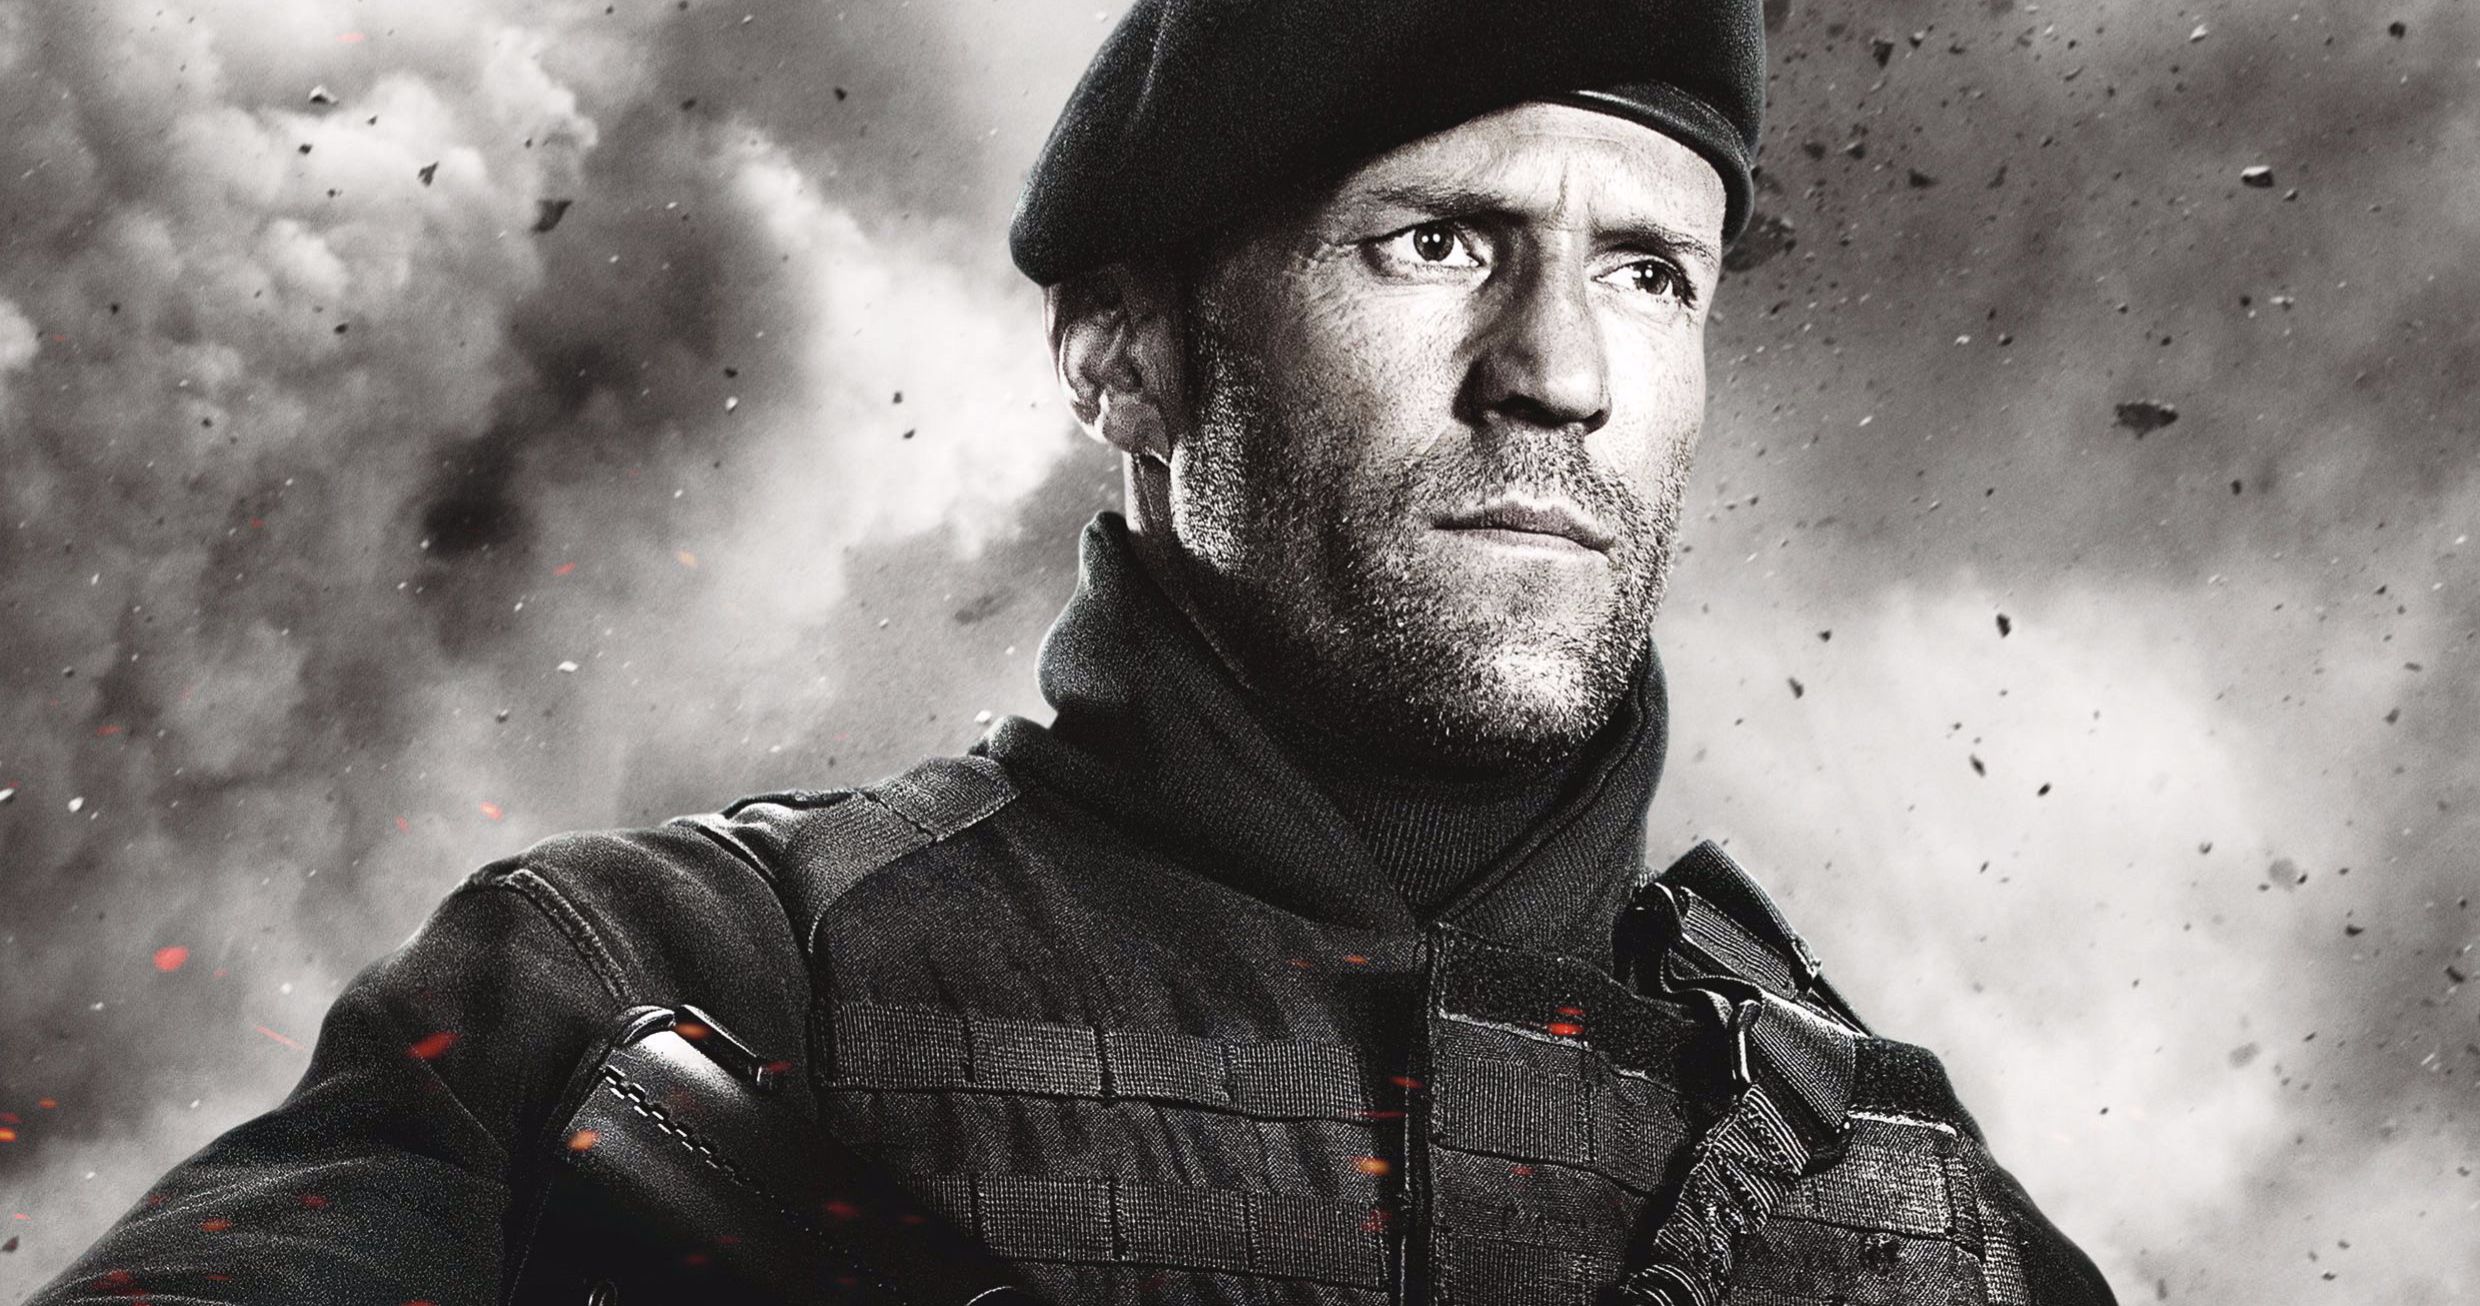 The Expendables: A Christmas Story Spin-Off in the Works with Jason Statham?